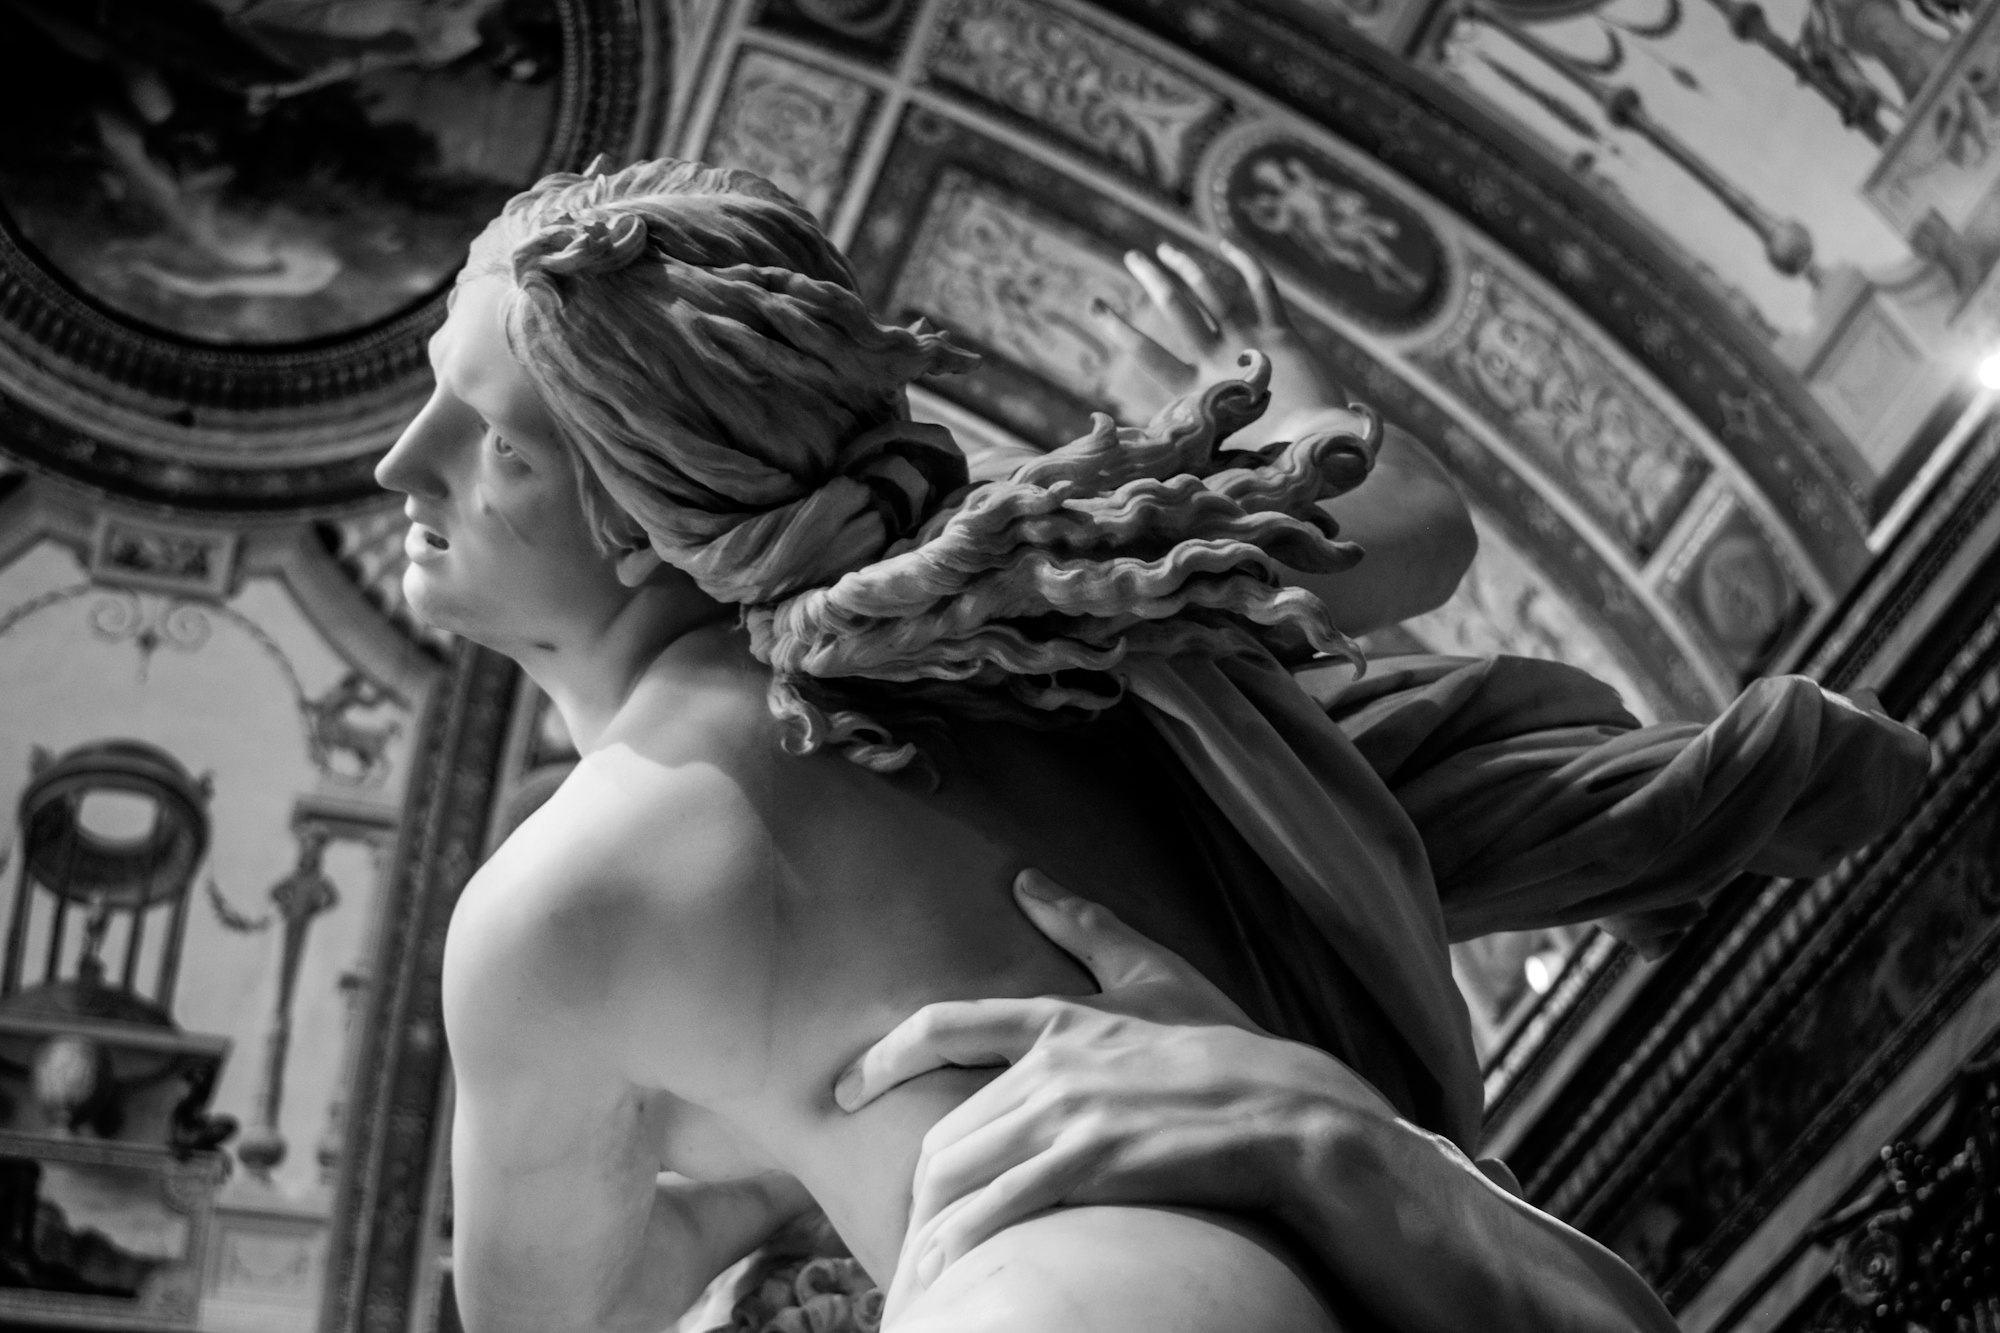 Prosperina was abducted by evil dark world god Hades, who was in love with her and knew her mother wouldn't give him her hand. He succeeded, brought her into the dark world, but Zeus made him return her back. Made by Gian Lorenzo Bernini in withe marble, when he was only 23 years old.